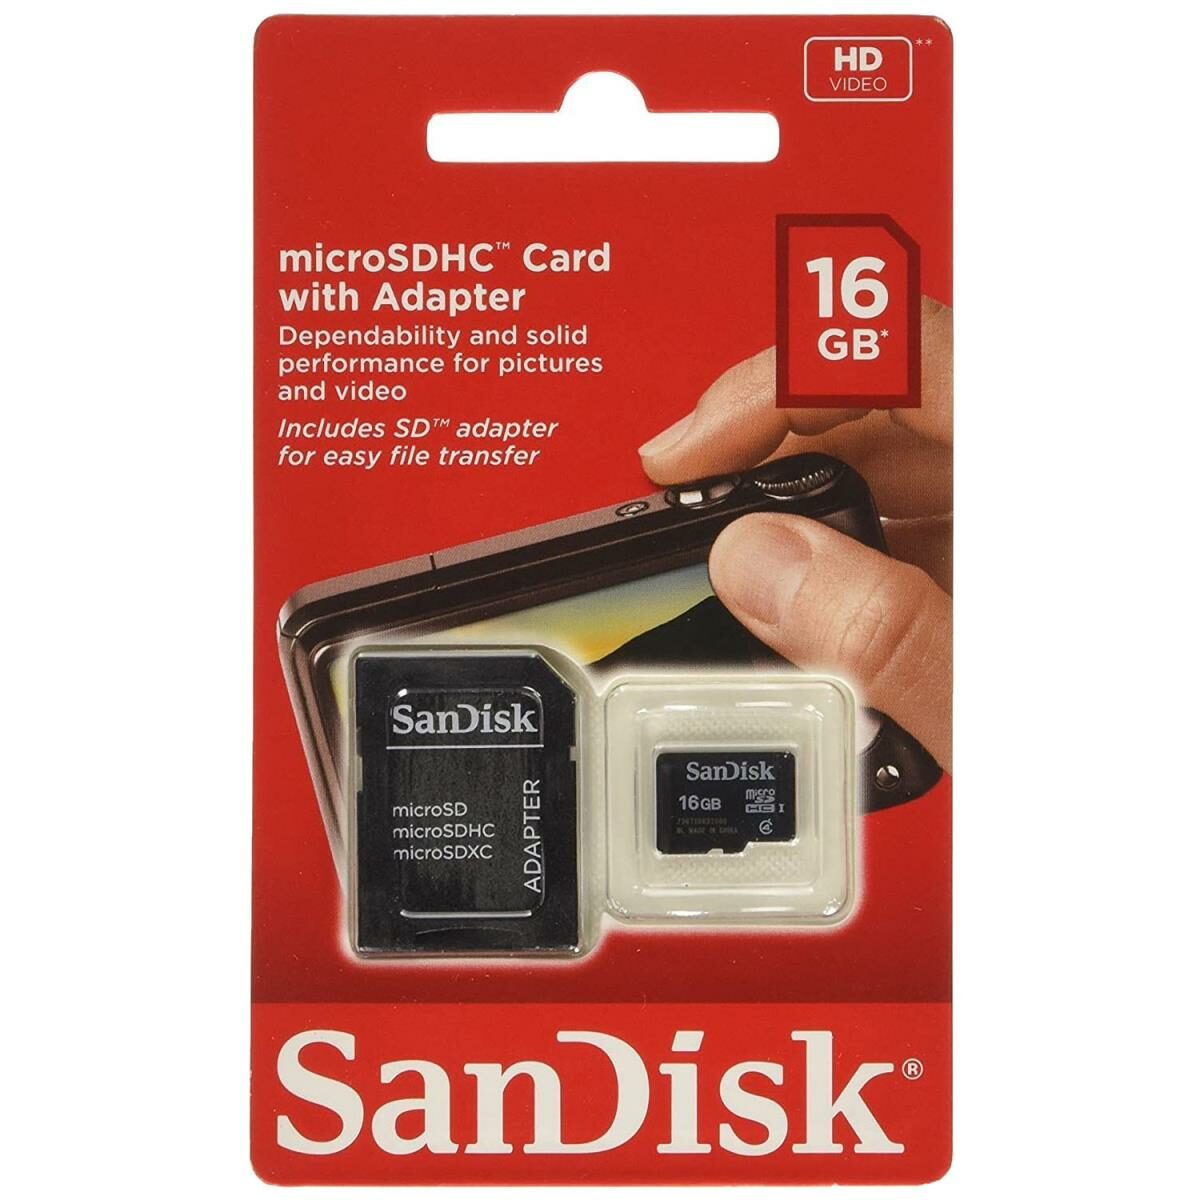 SanDisk Micro SDHC Card with SD Adapter